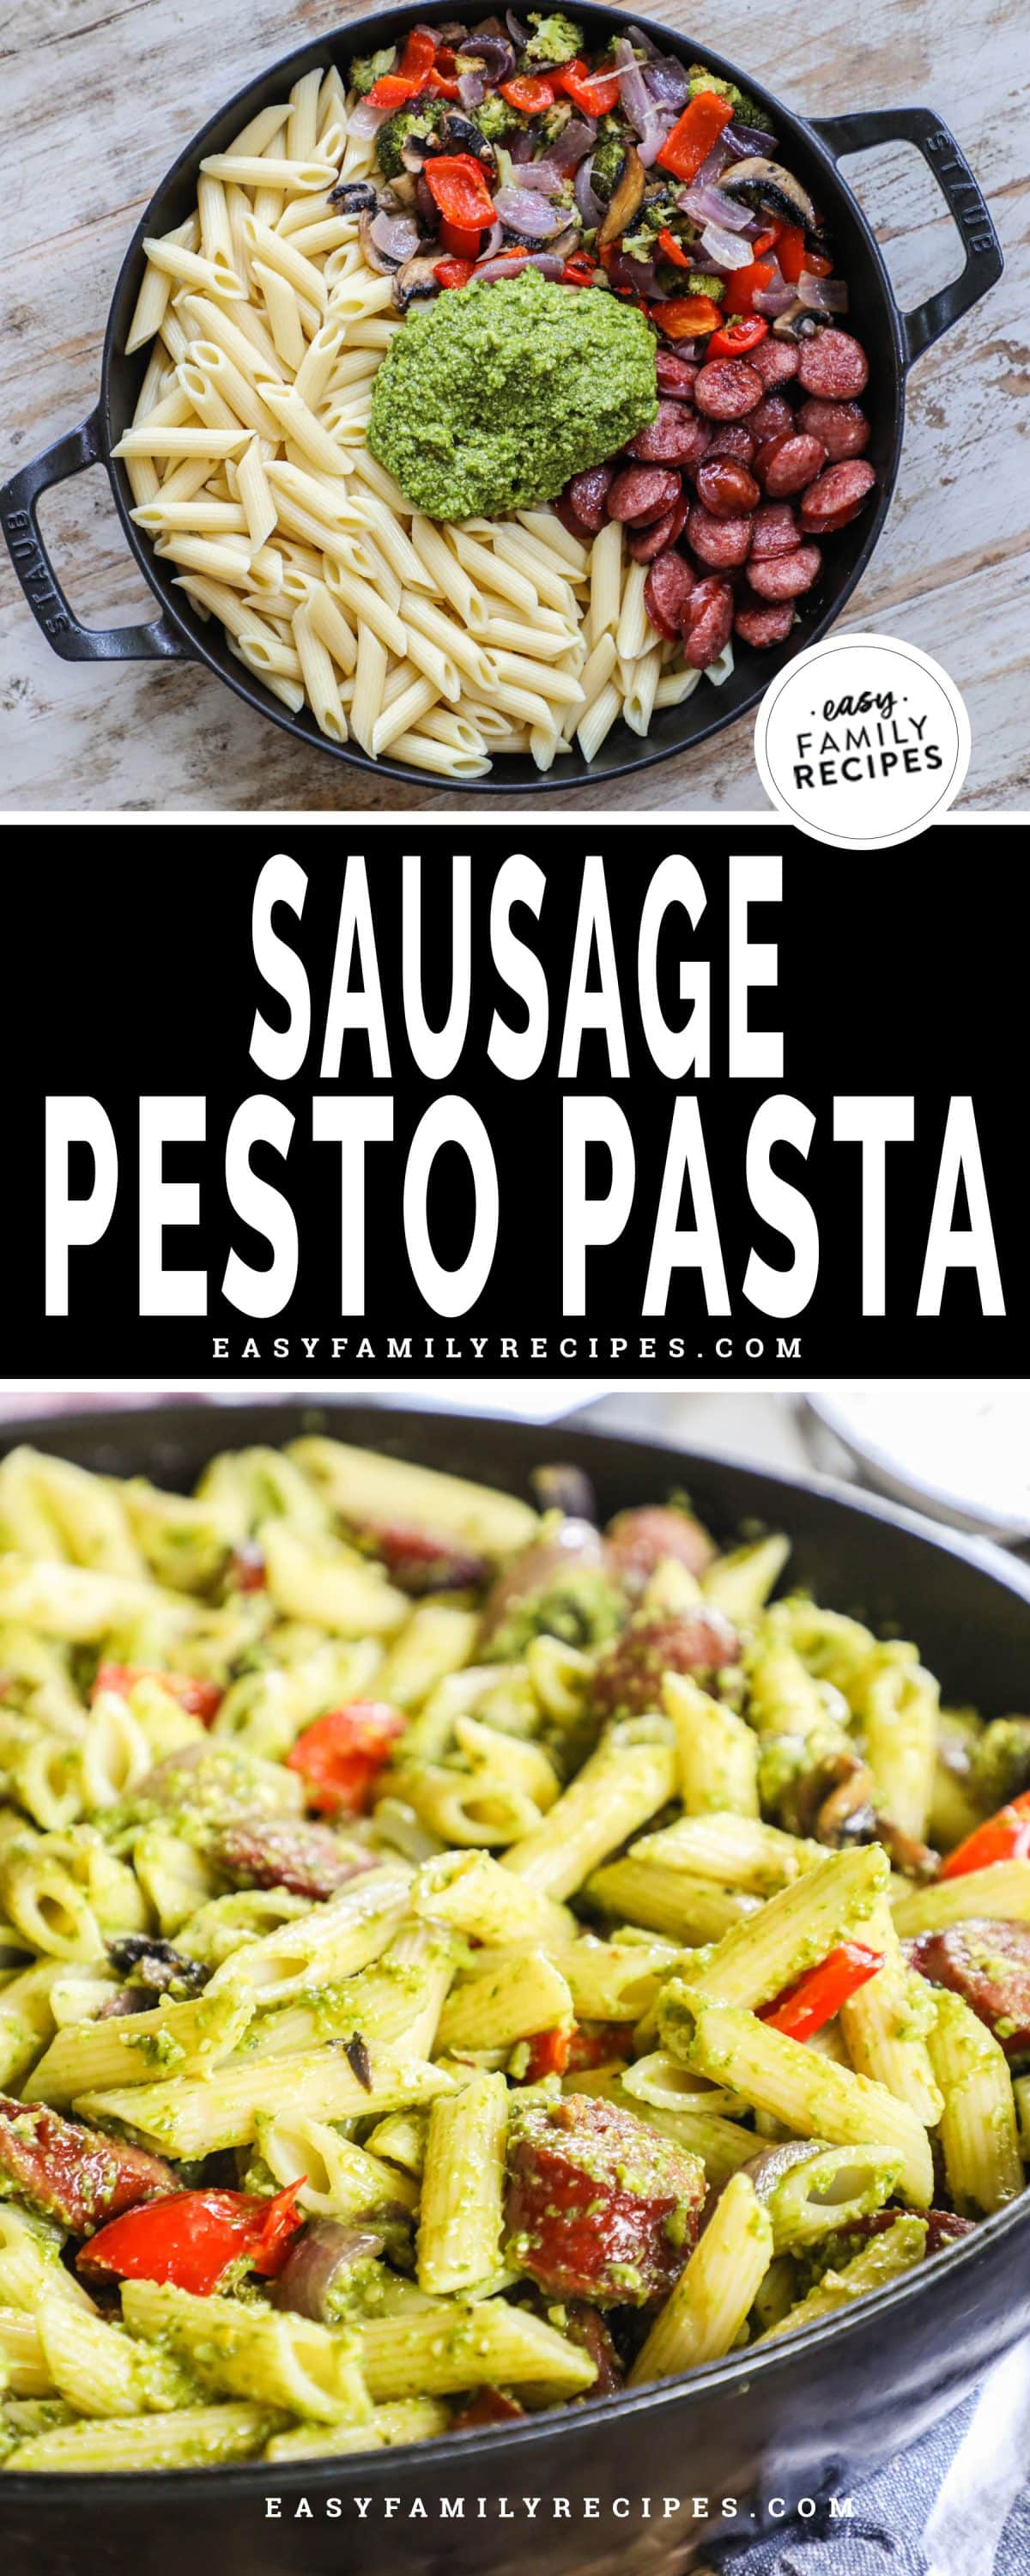 Pesto pasta mixed together in a cast iron skillet and another image with the pasta, meat, veggies, and pesto separate in a skillet before mixing.